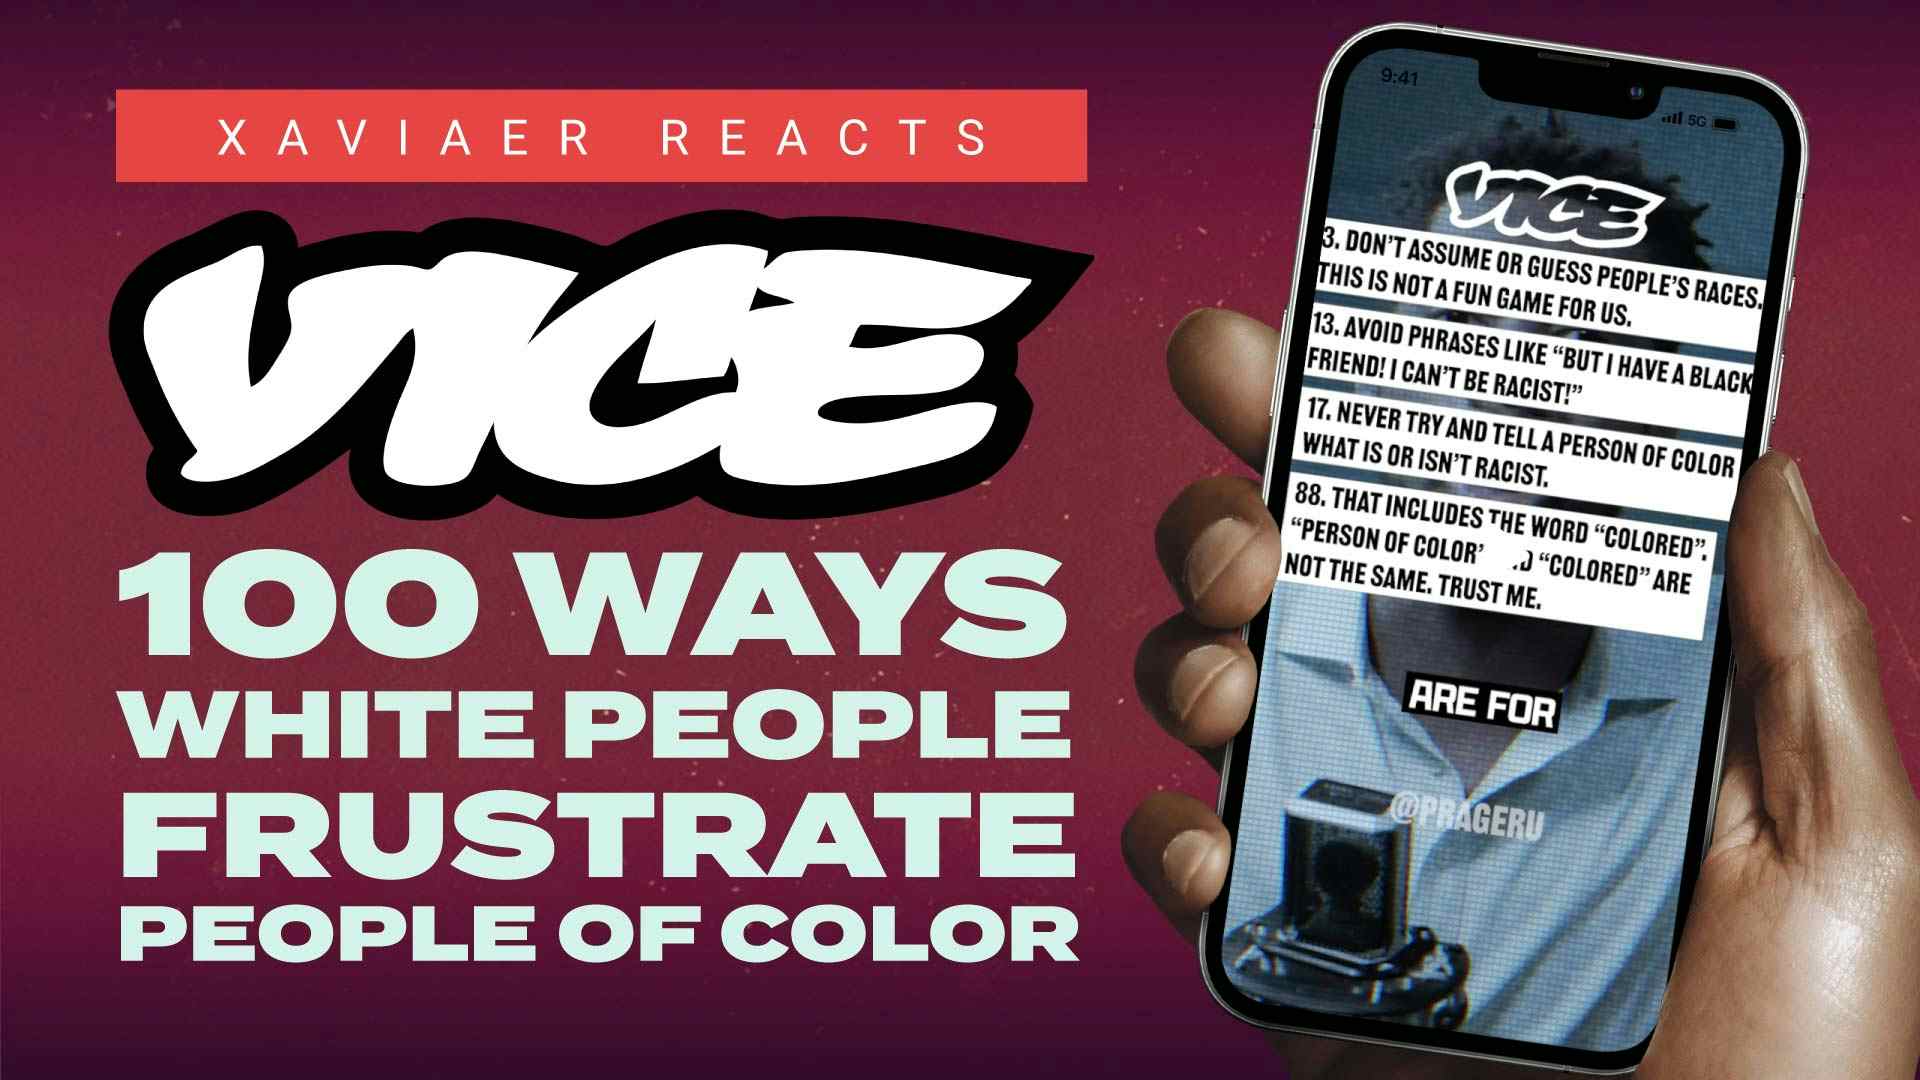 Vice News: 100 Ways White People Frustrate People of Color